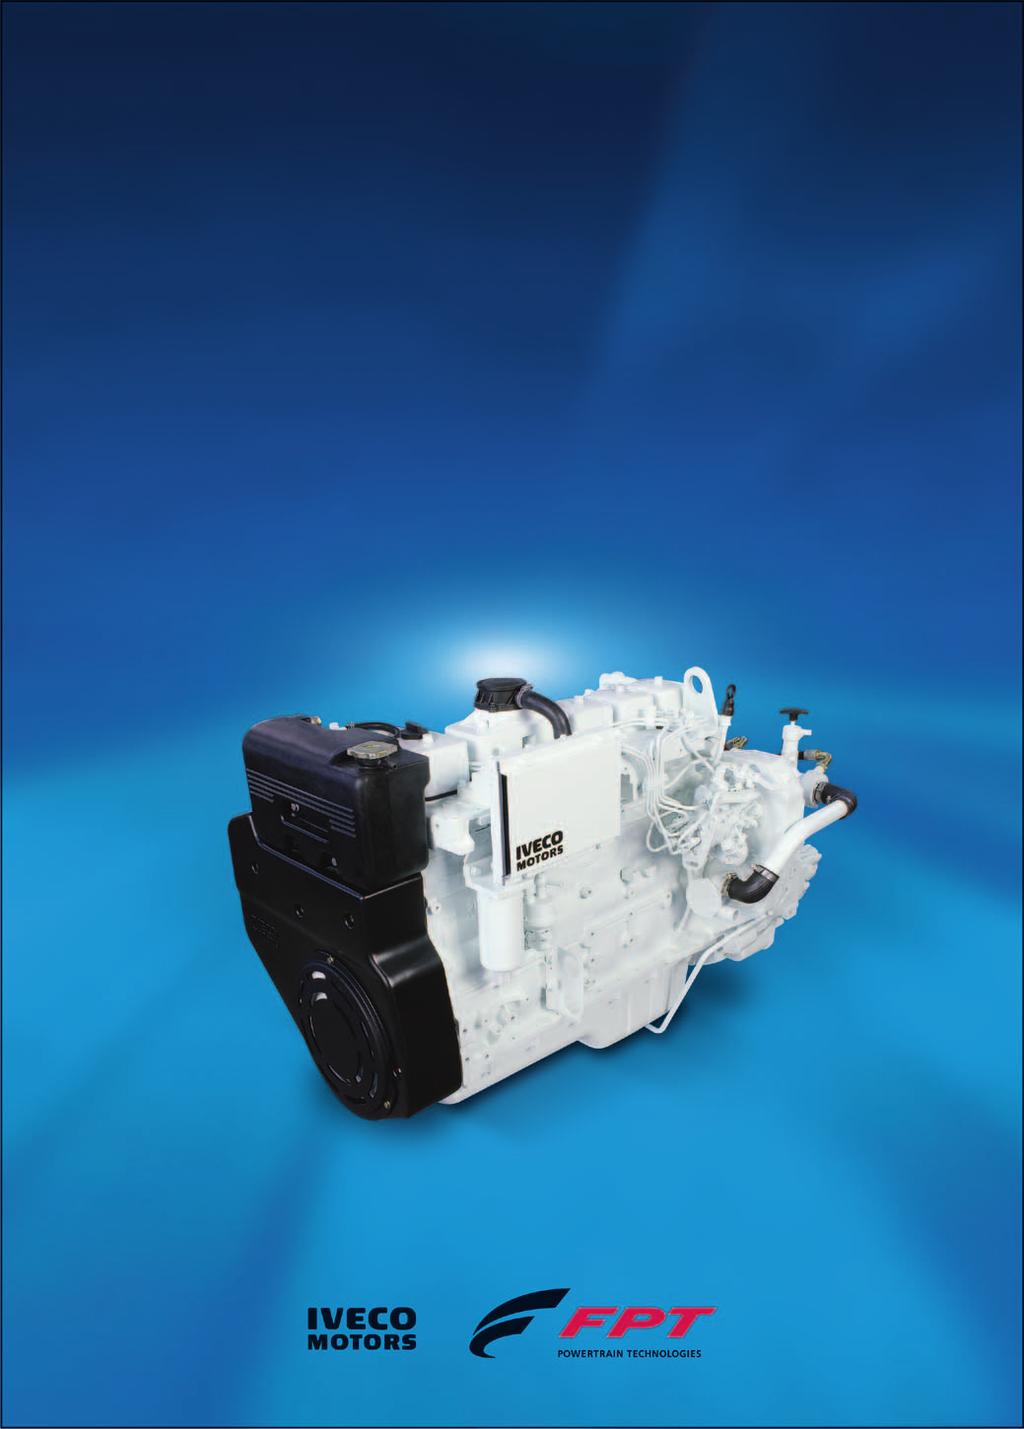 NEF 150 N67 MNA M15 FOR MARINE APPLICATIONS 6 CYLINDER IN-LINE - DIESEL CYCLE 110 kw (148 hp) @ 2800 rpm (A1) 99.